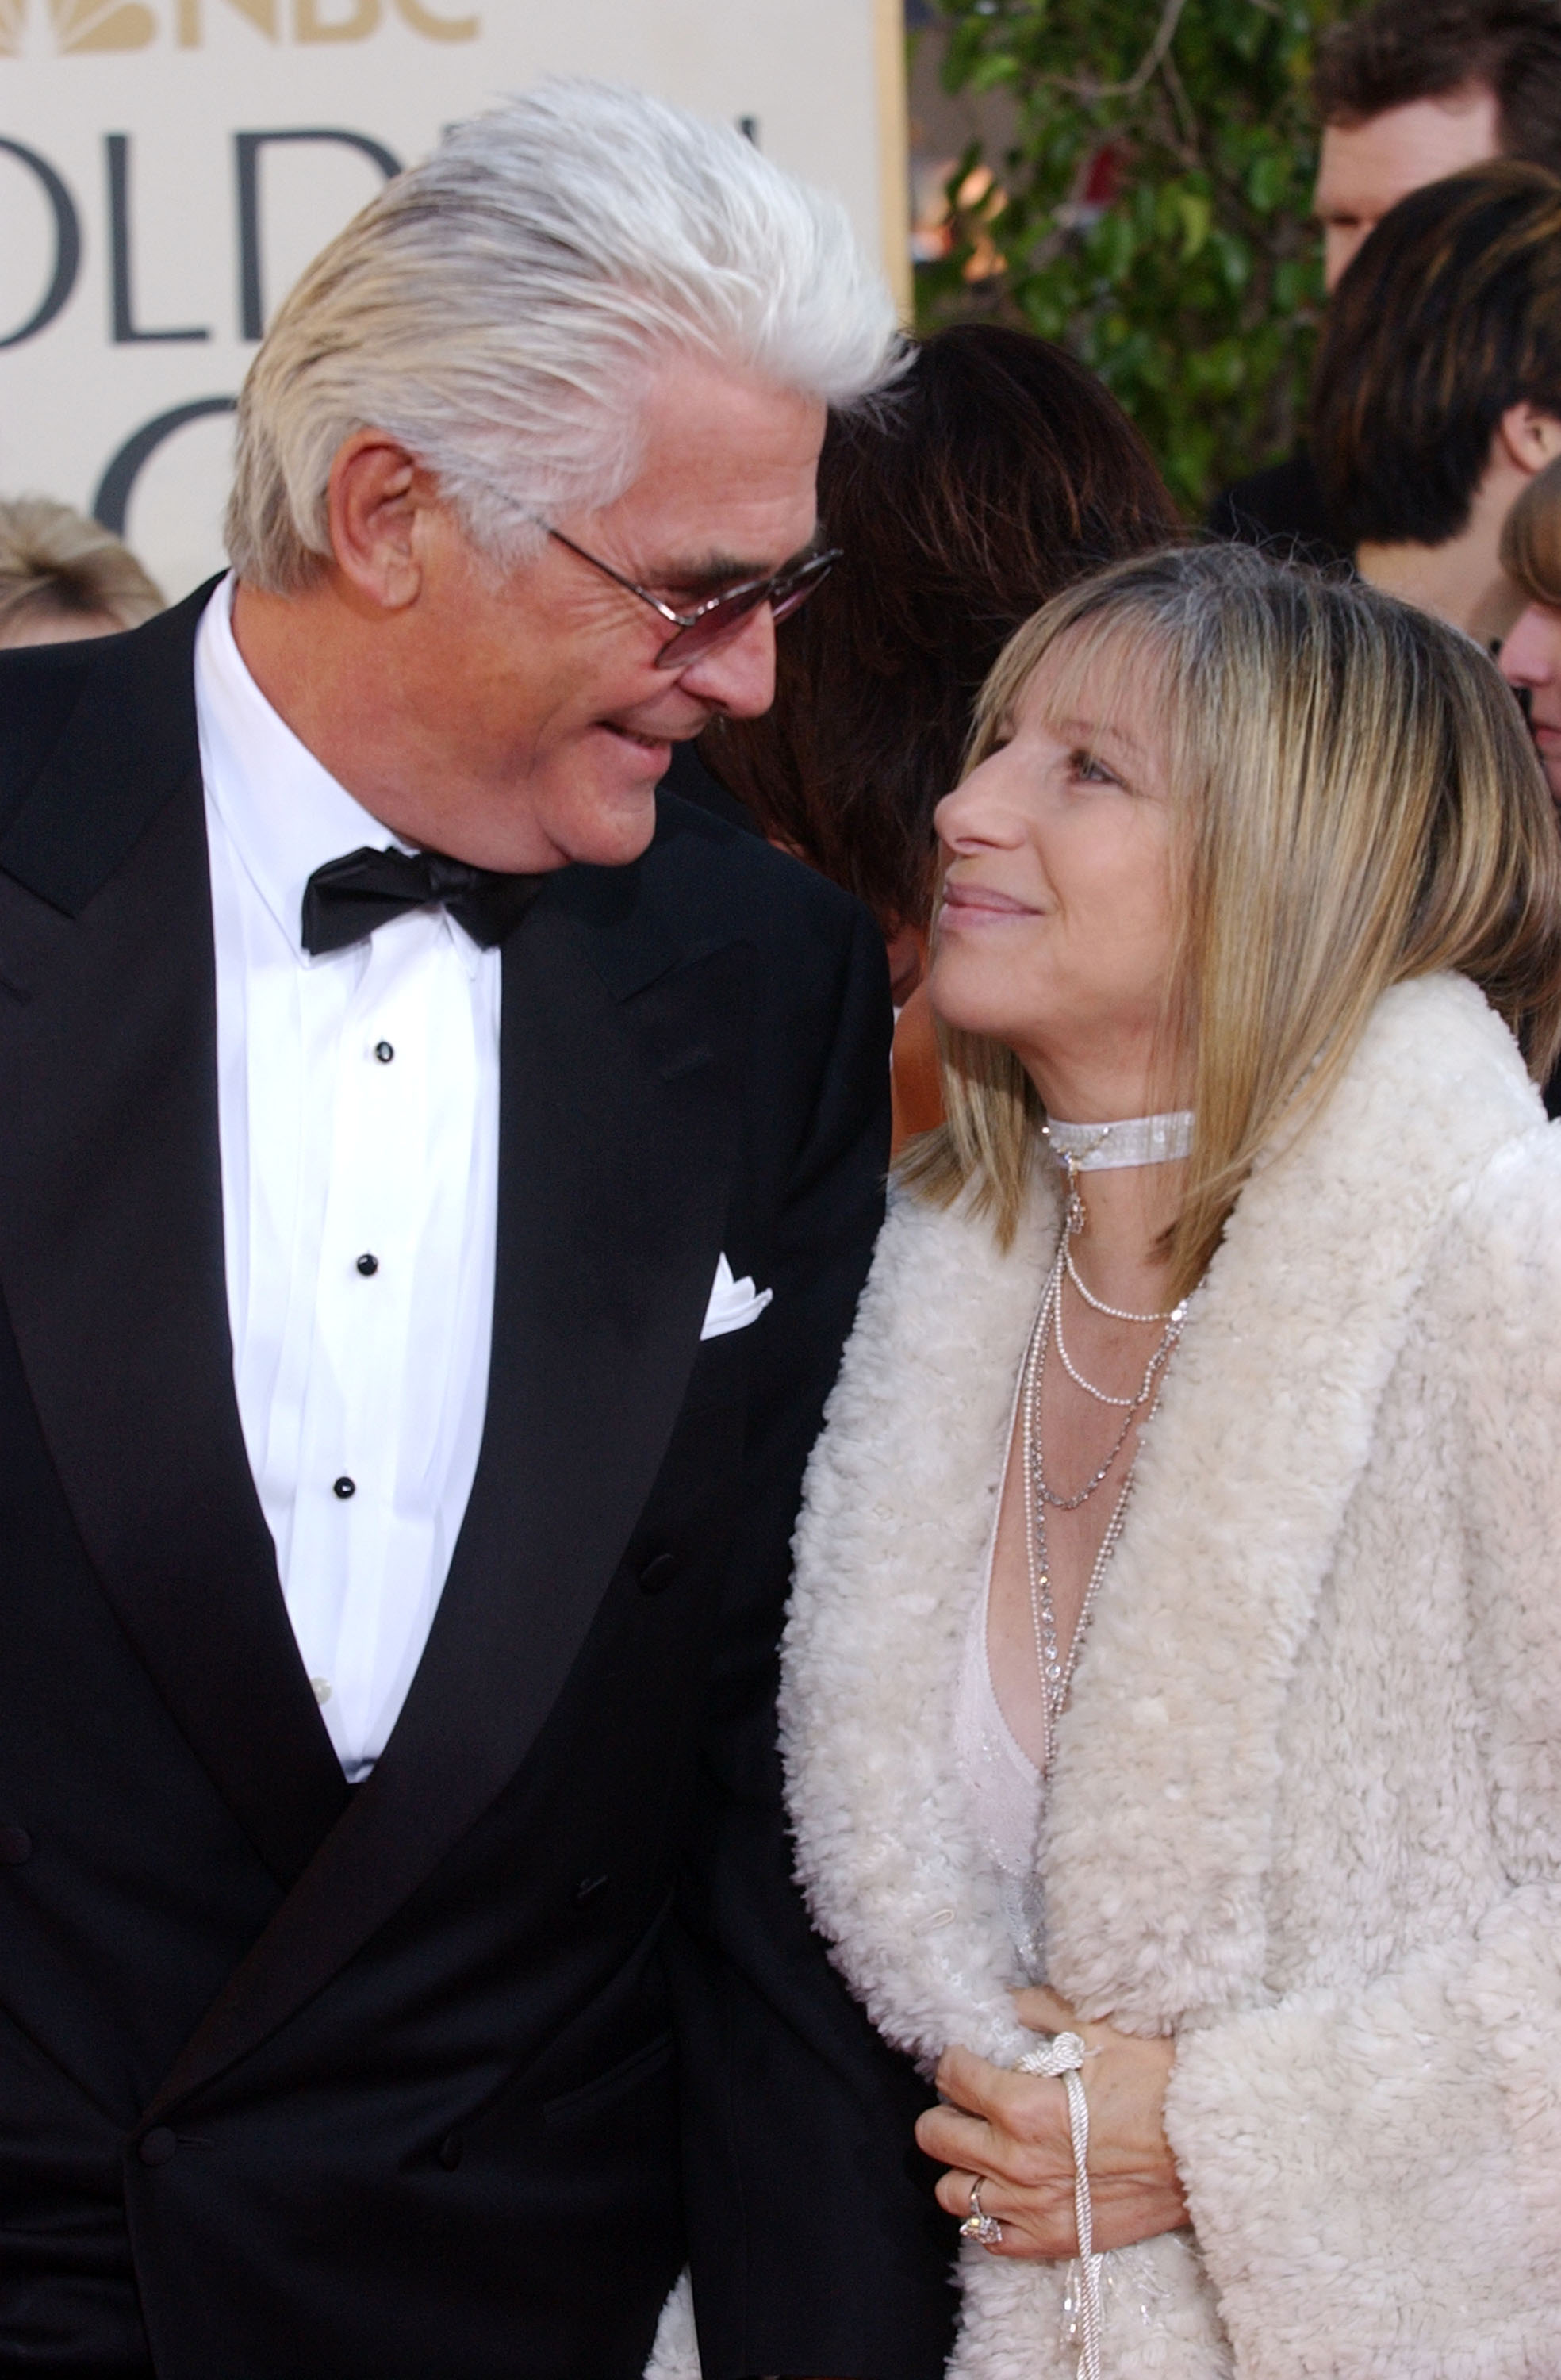 James Brolin and Barbra Streisand at the 61st Annual Golden Globe Awards in Beverly Hills, California in 2004. | Source: Getty Images